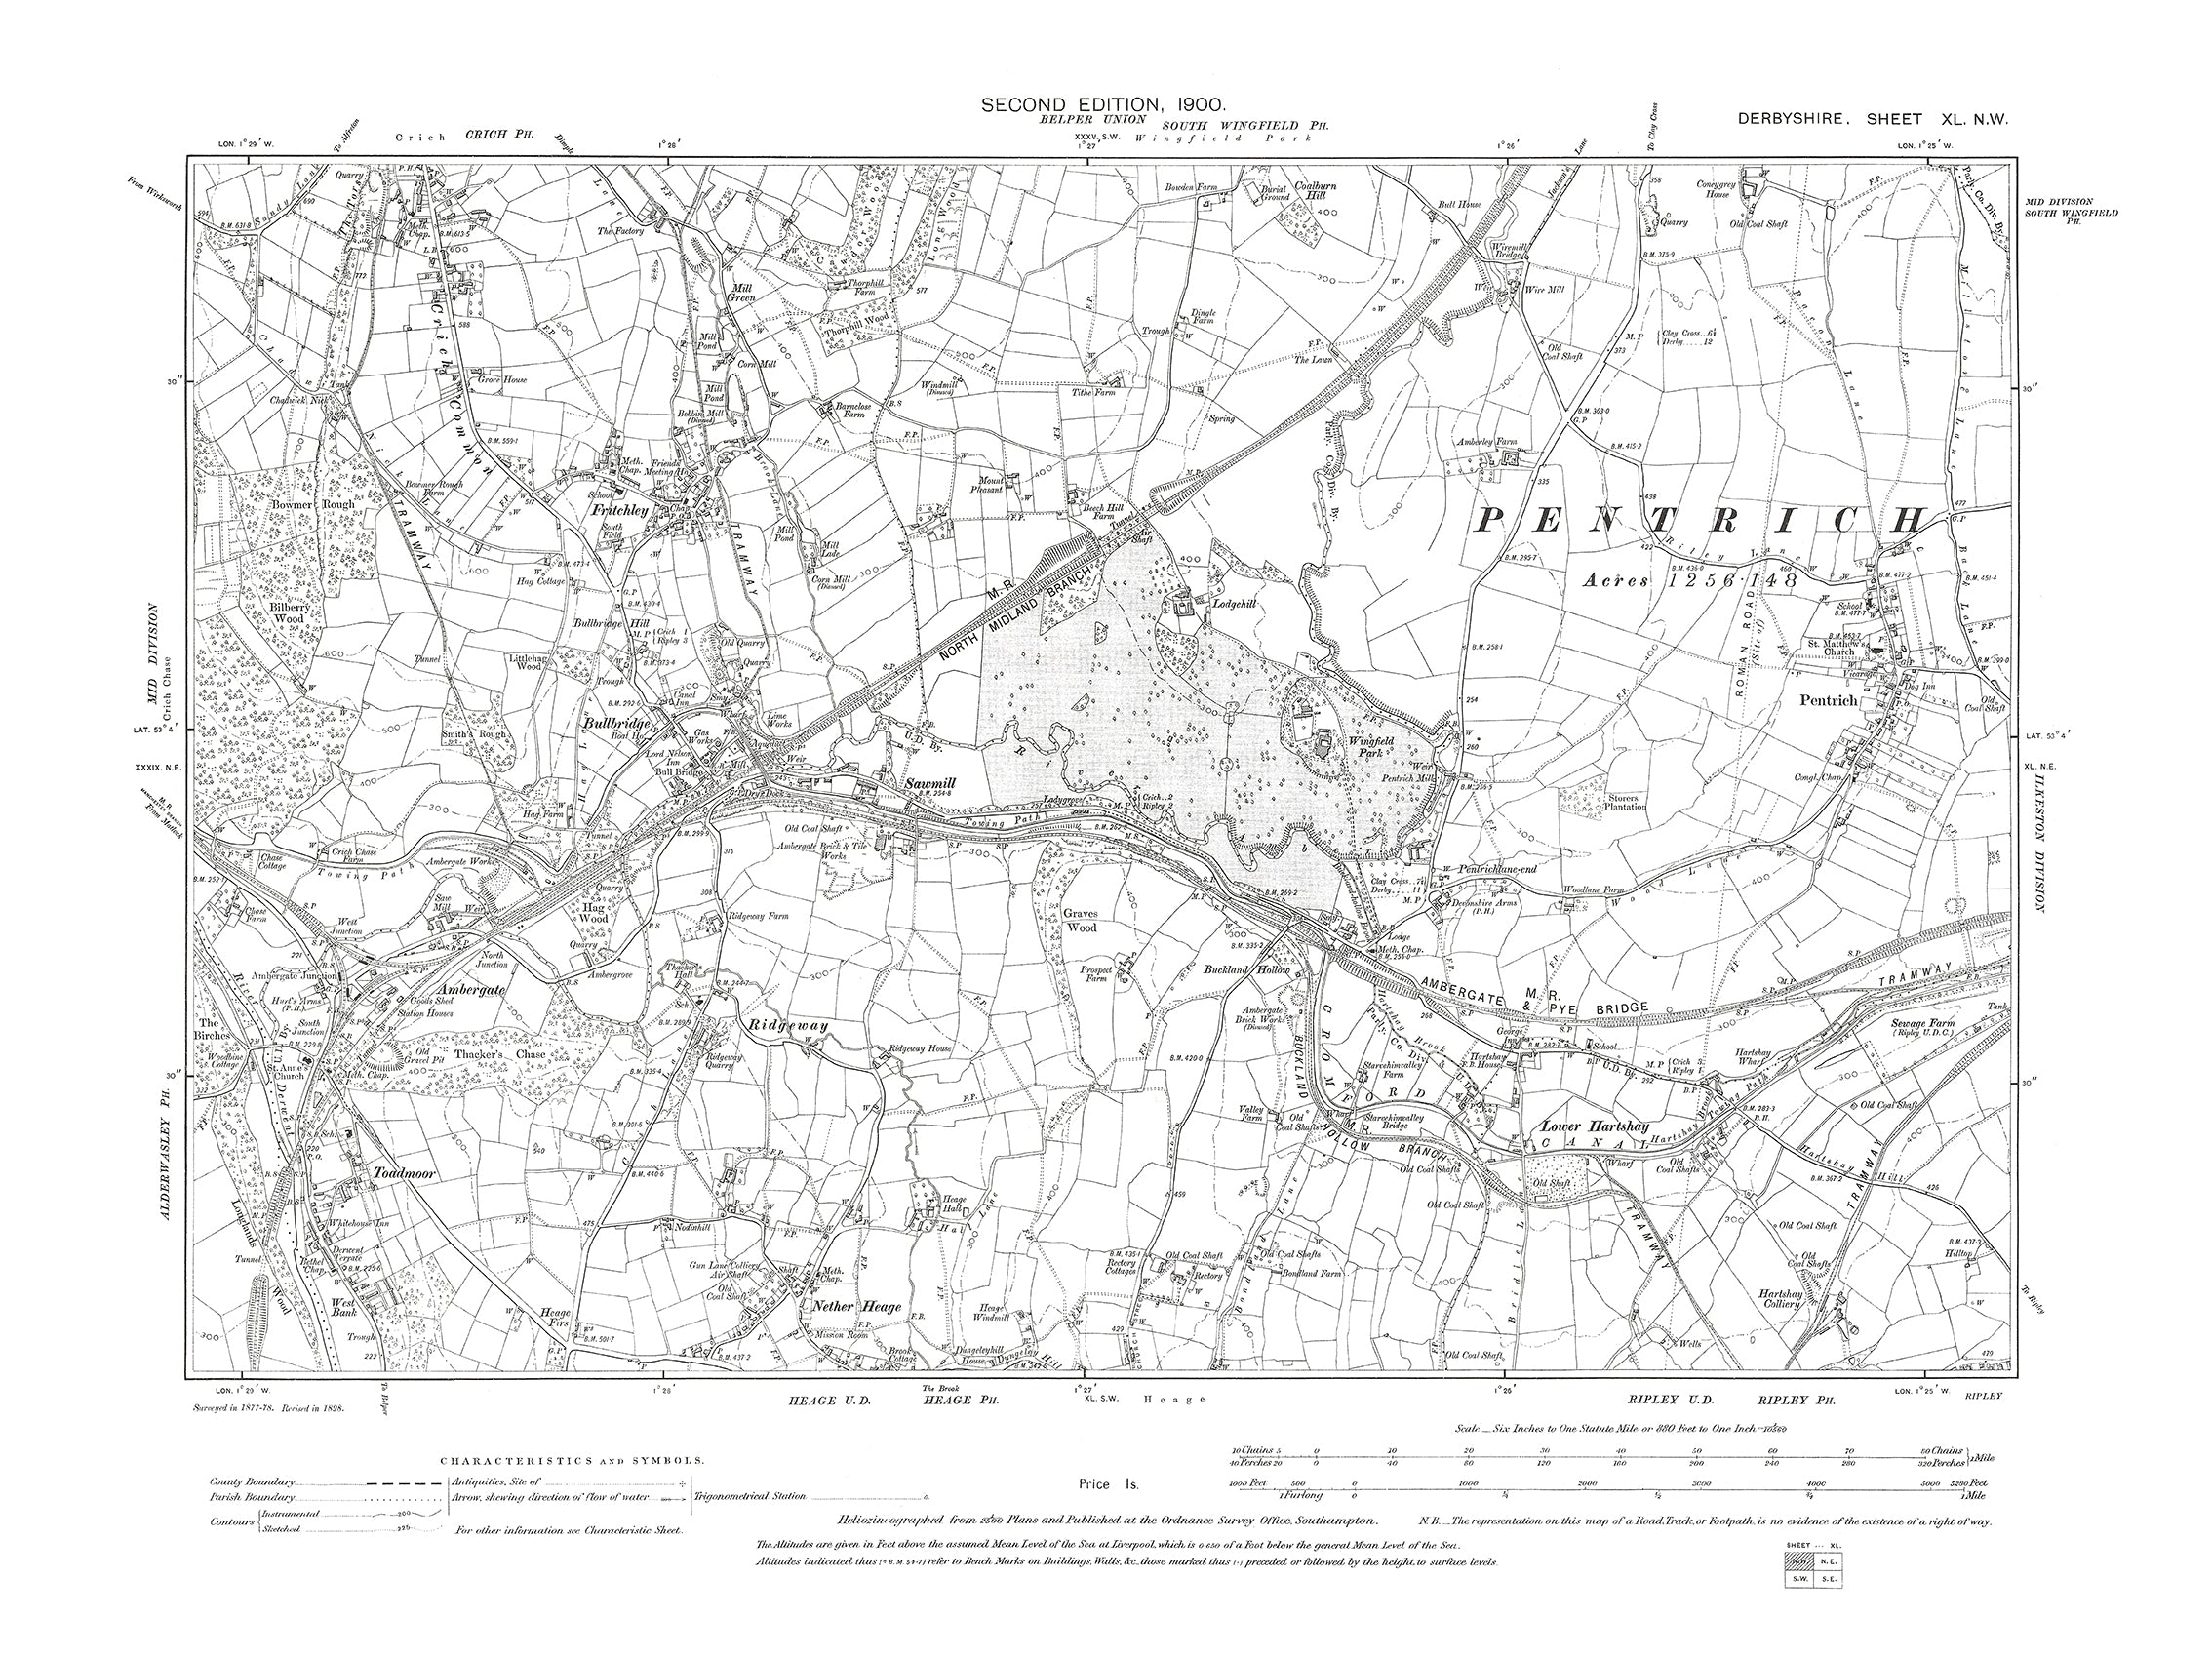 Old OS map dated 1900, showing Fritchley, Bullbridge, Toadmoor in Derb ...